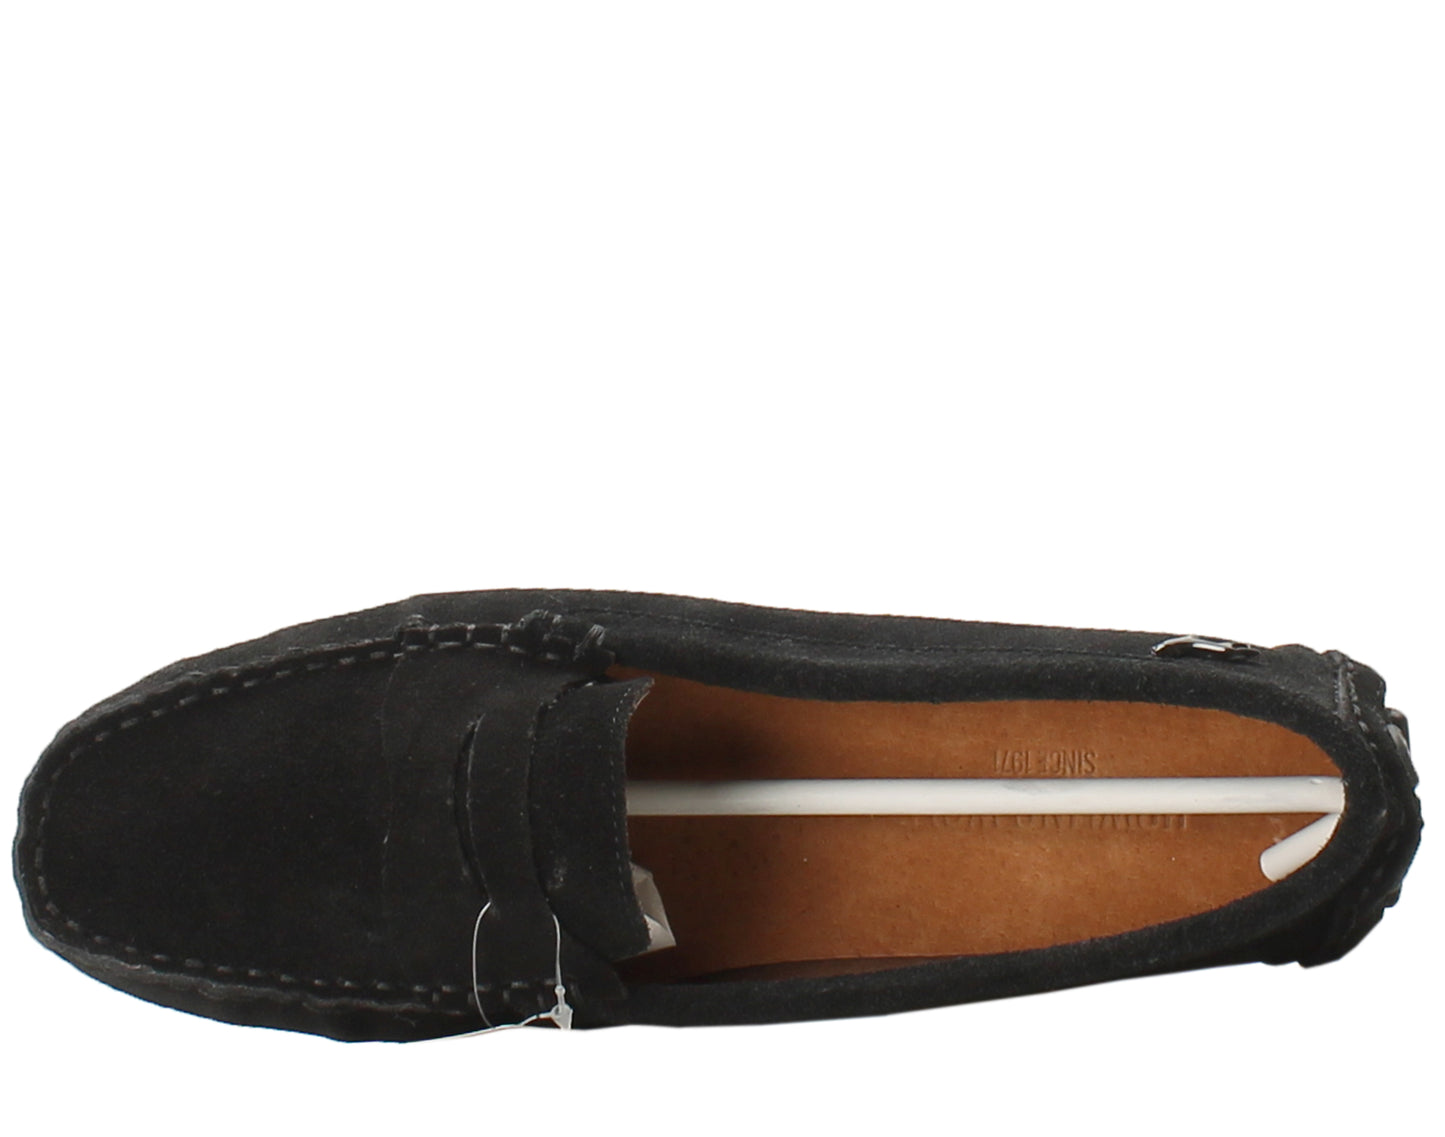 Howling Wolf Sydney Penny Driver Women's Shoes